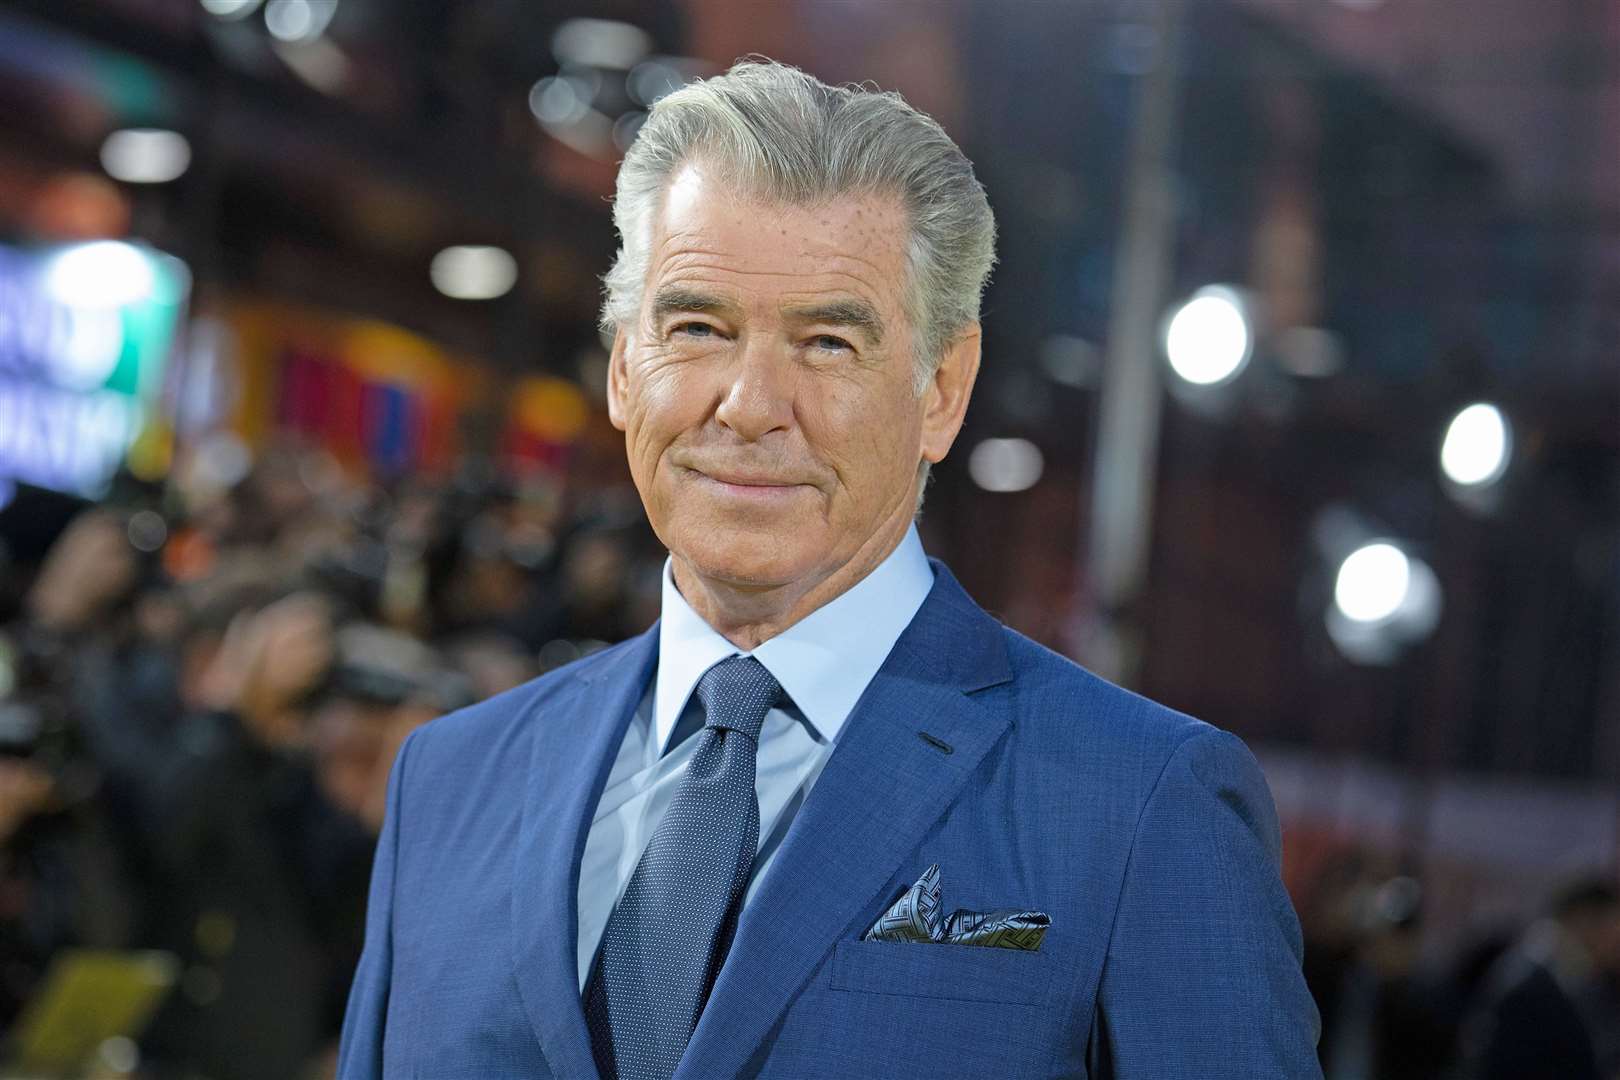 Pierce Brosnan said Leland ‘holds a mighty place in my heart’ (Suzan Moore/PA)